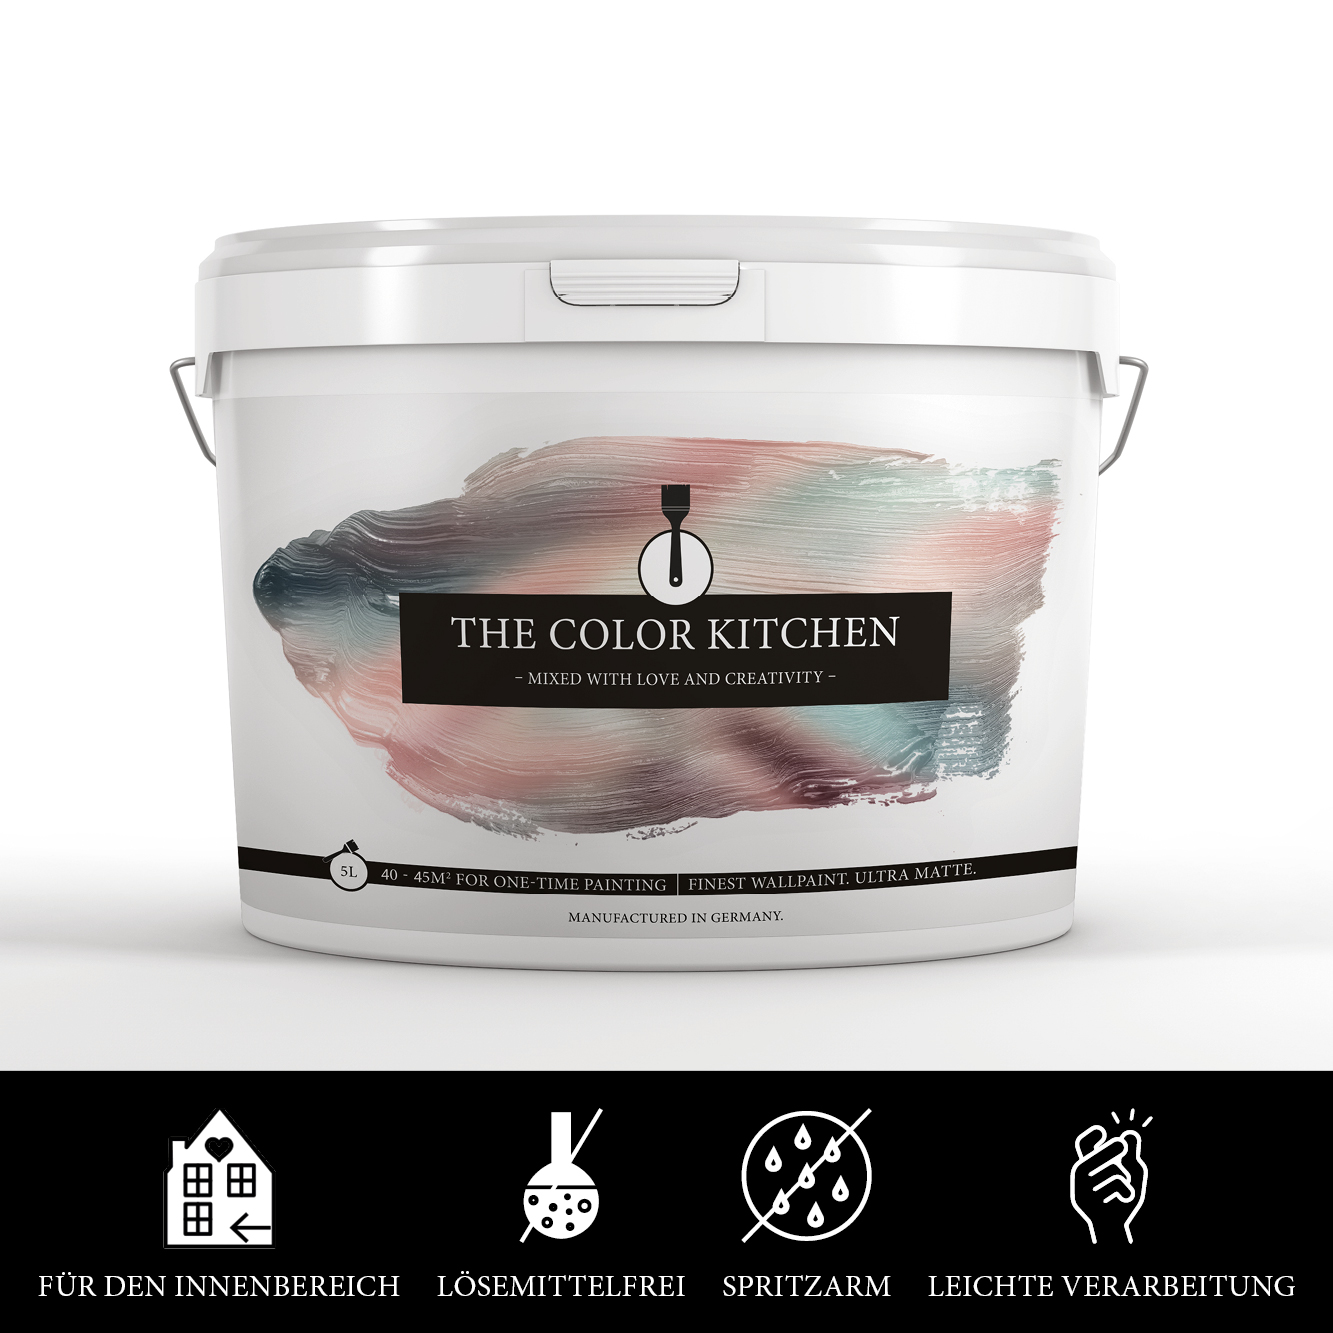 The Color Kitchen Ordinary Olive 5 l